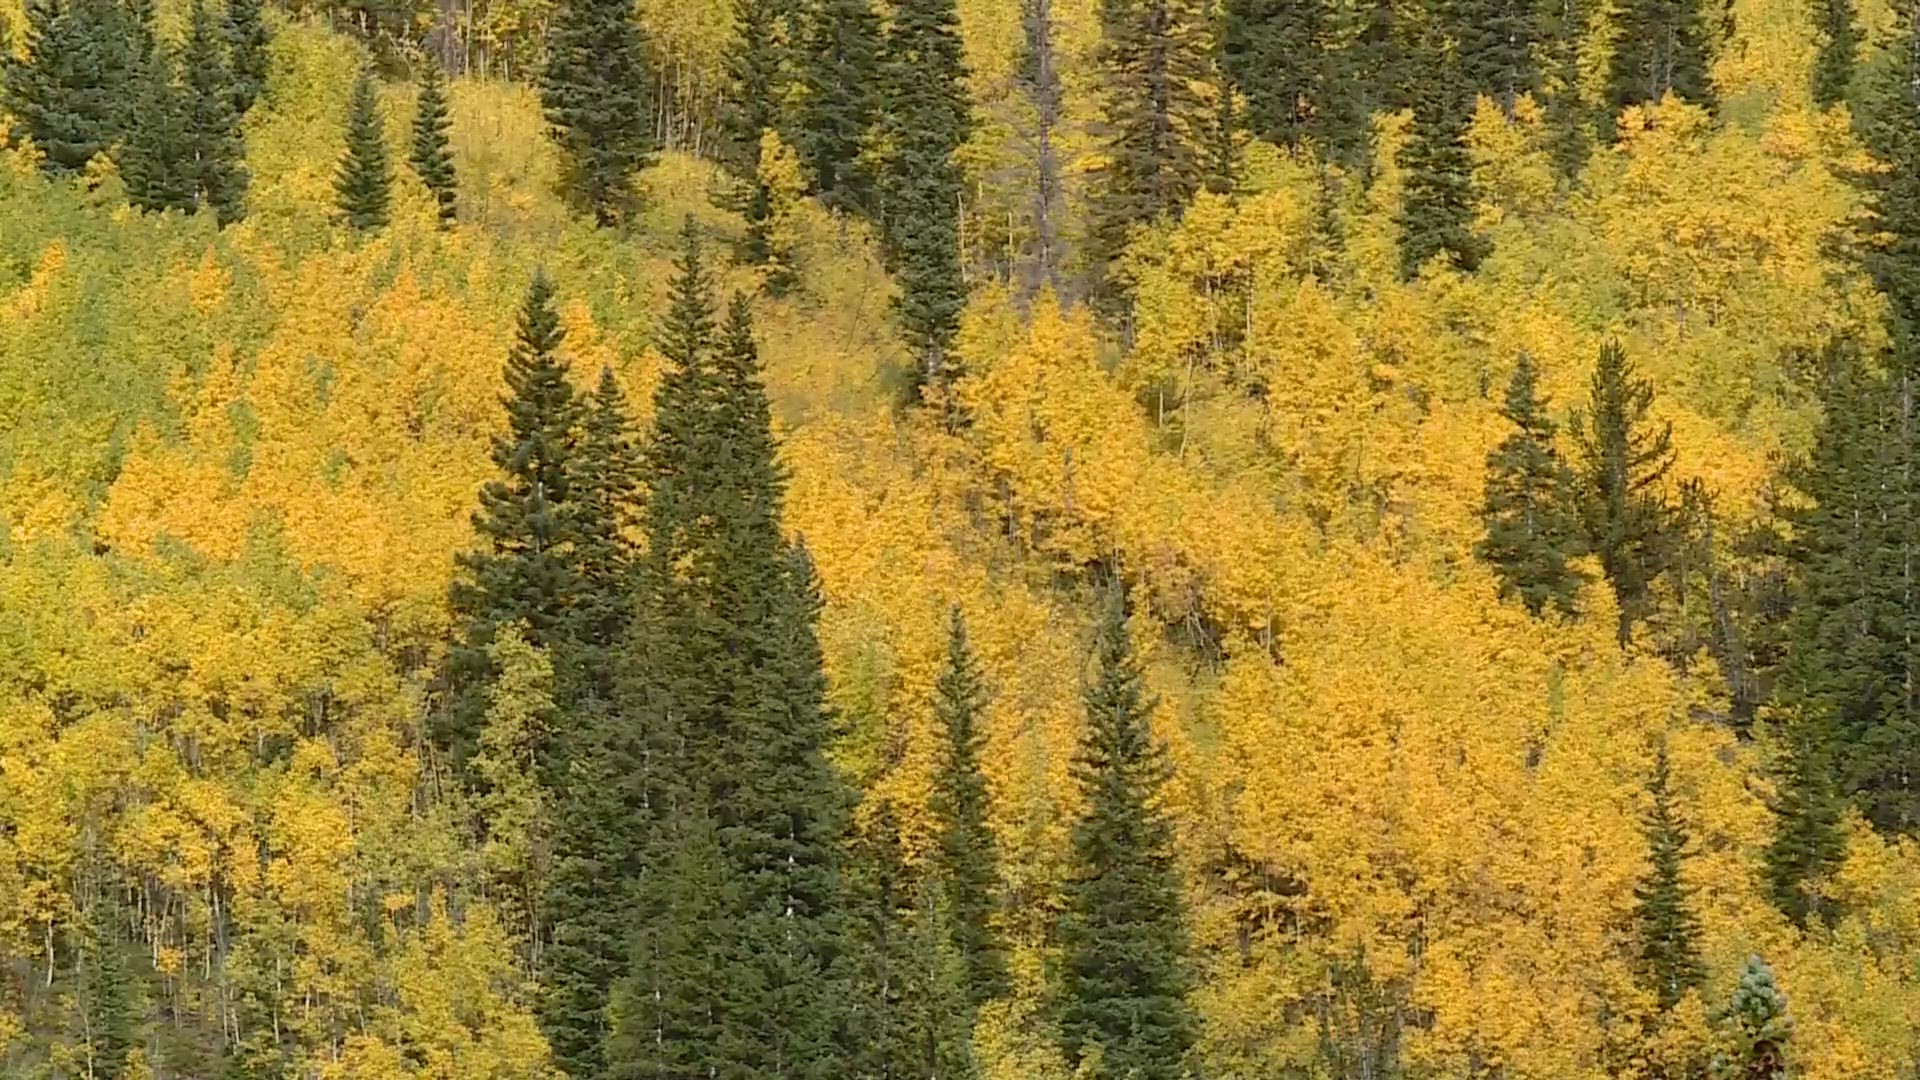 Here's where to find gorgeous fall colors in Colorado | 9news.com